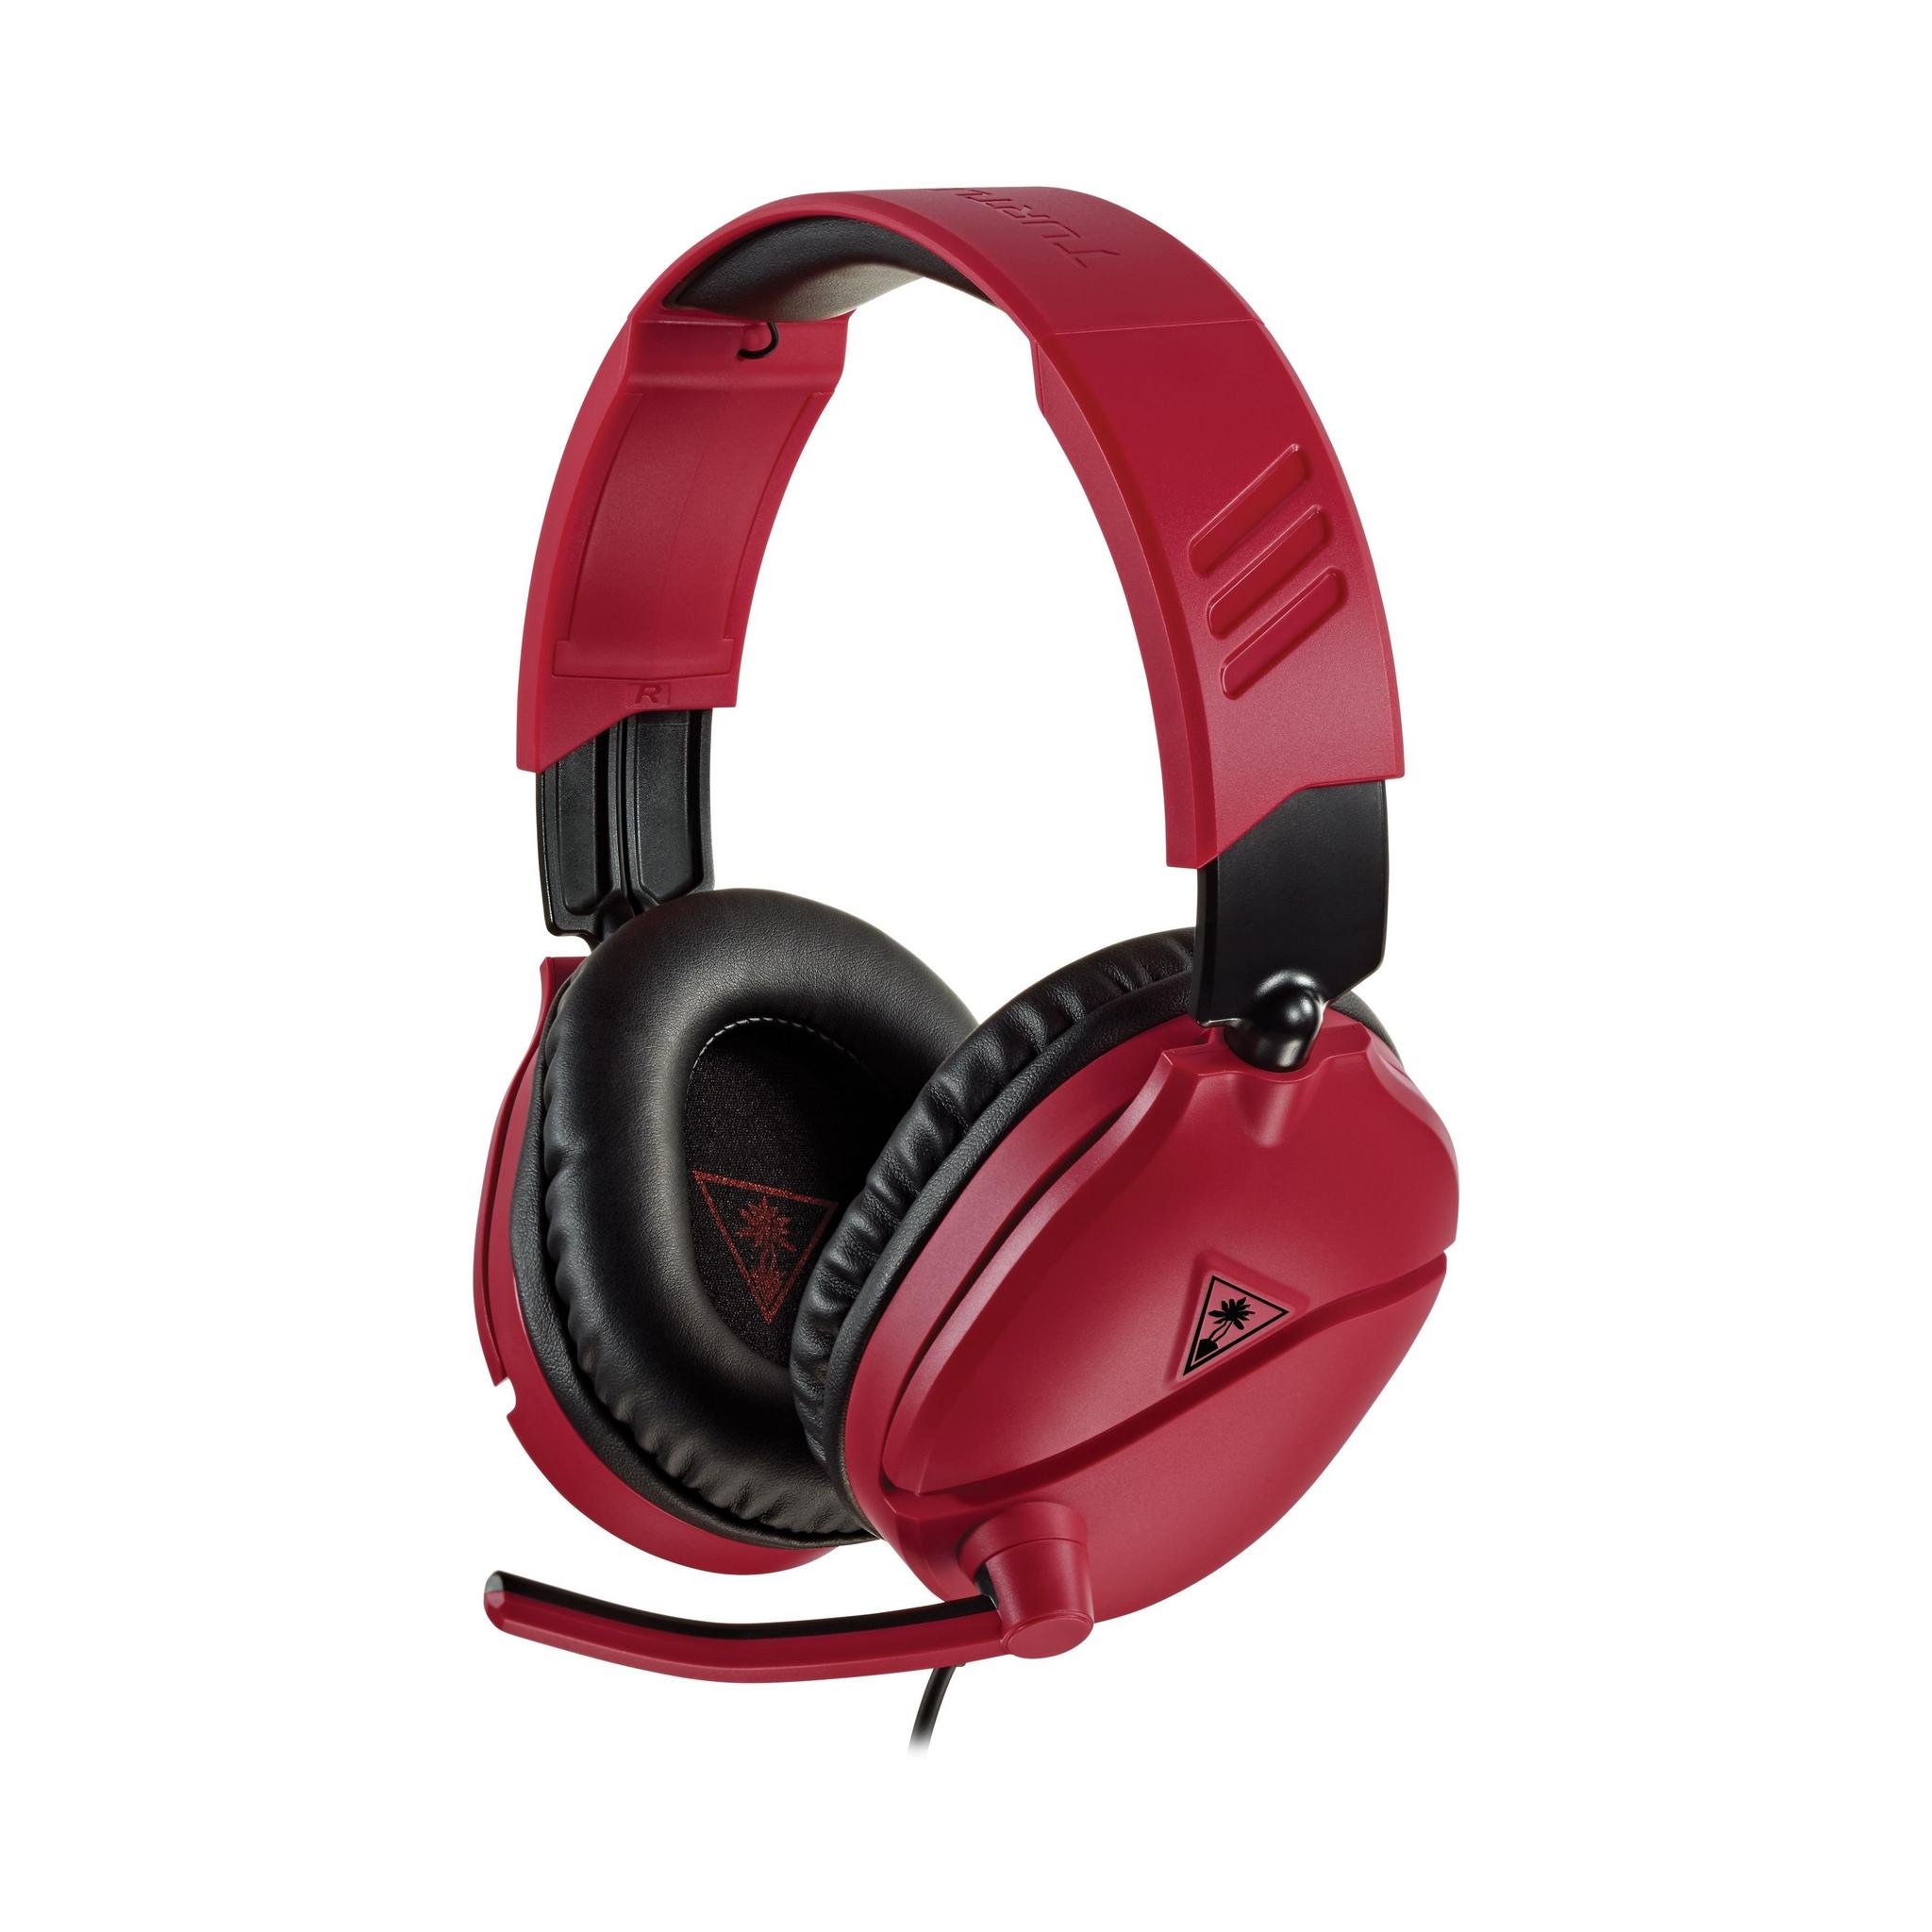 Turtlebeach Recon 70 Gaming Headset - Red